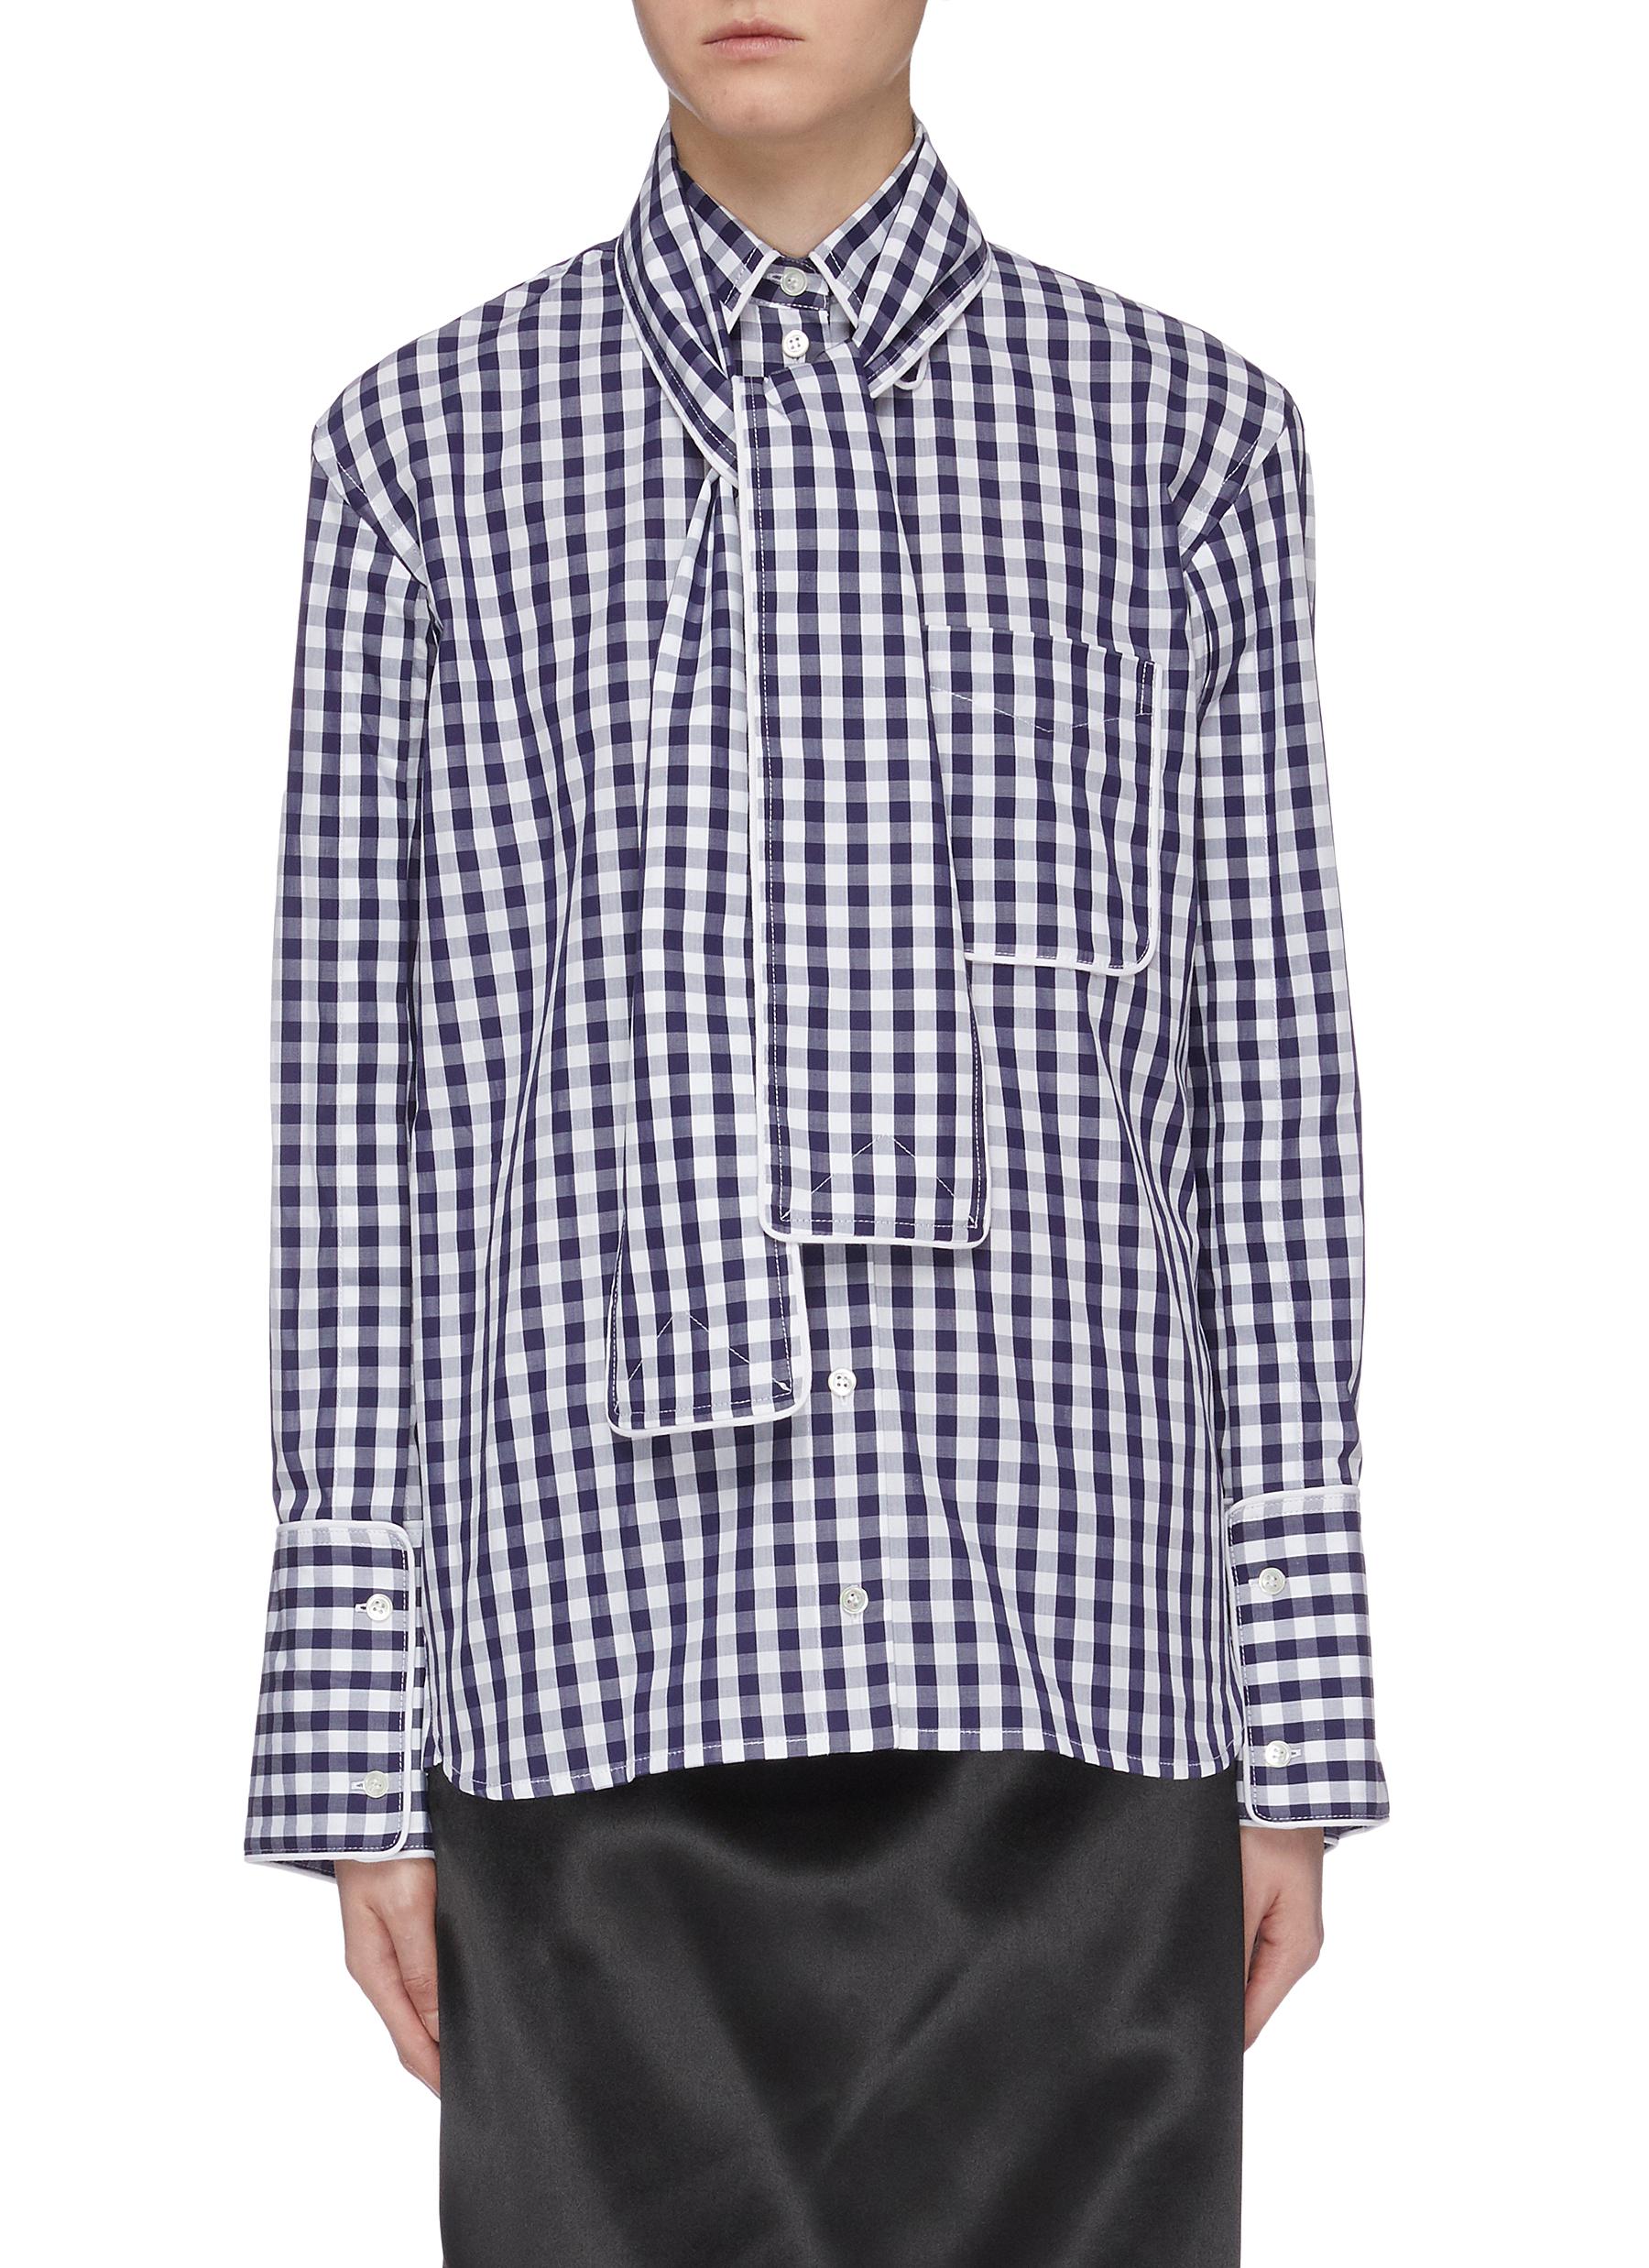 Scarf panel extended cuff gingham check shirt by Jw Anderson